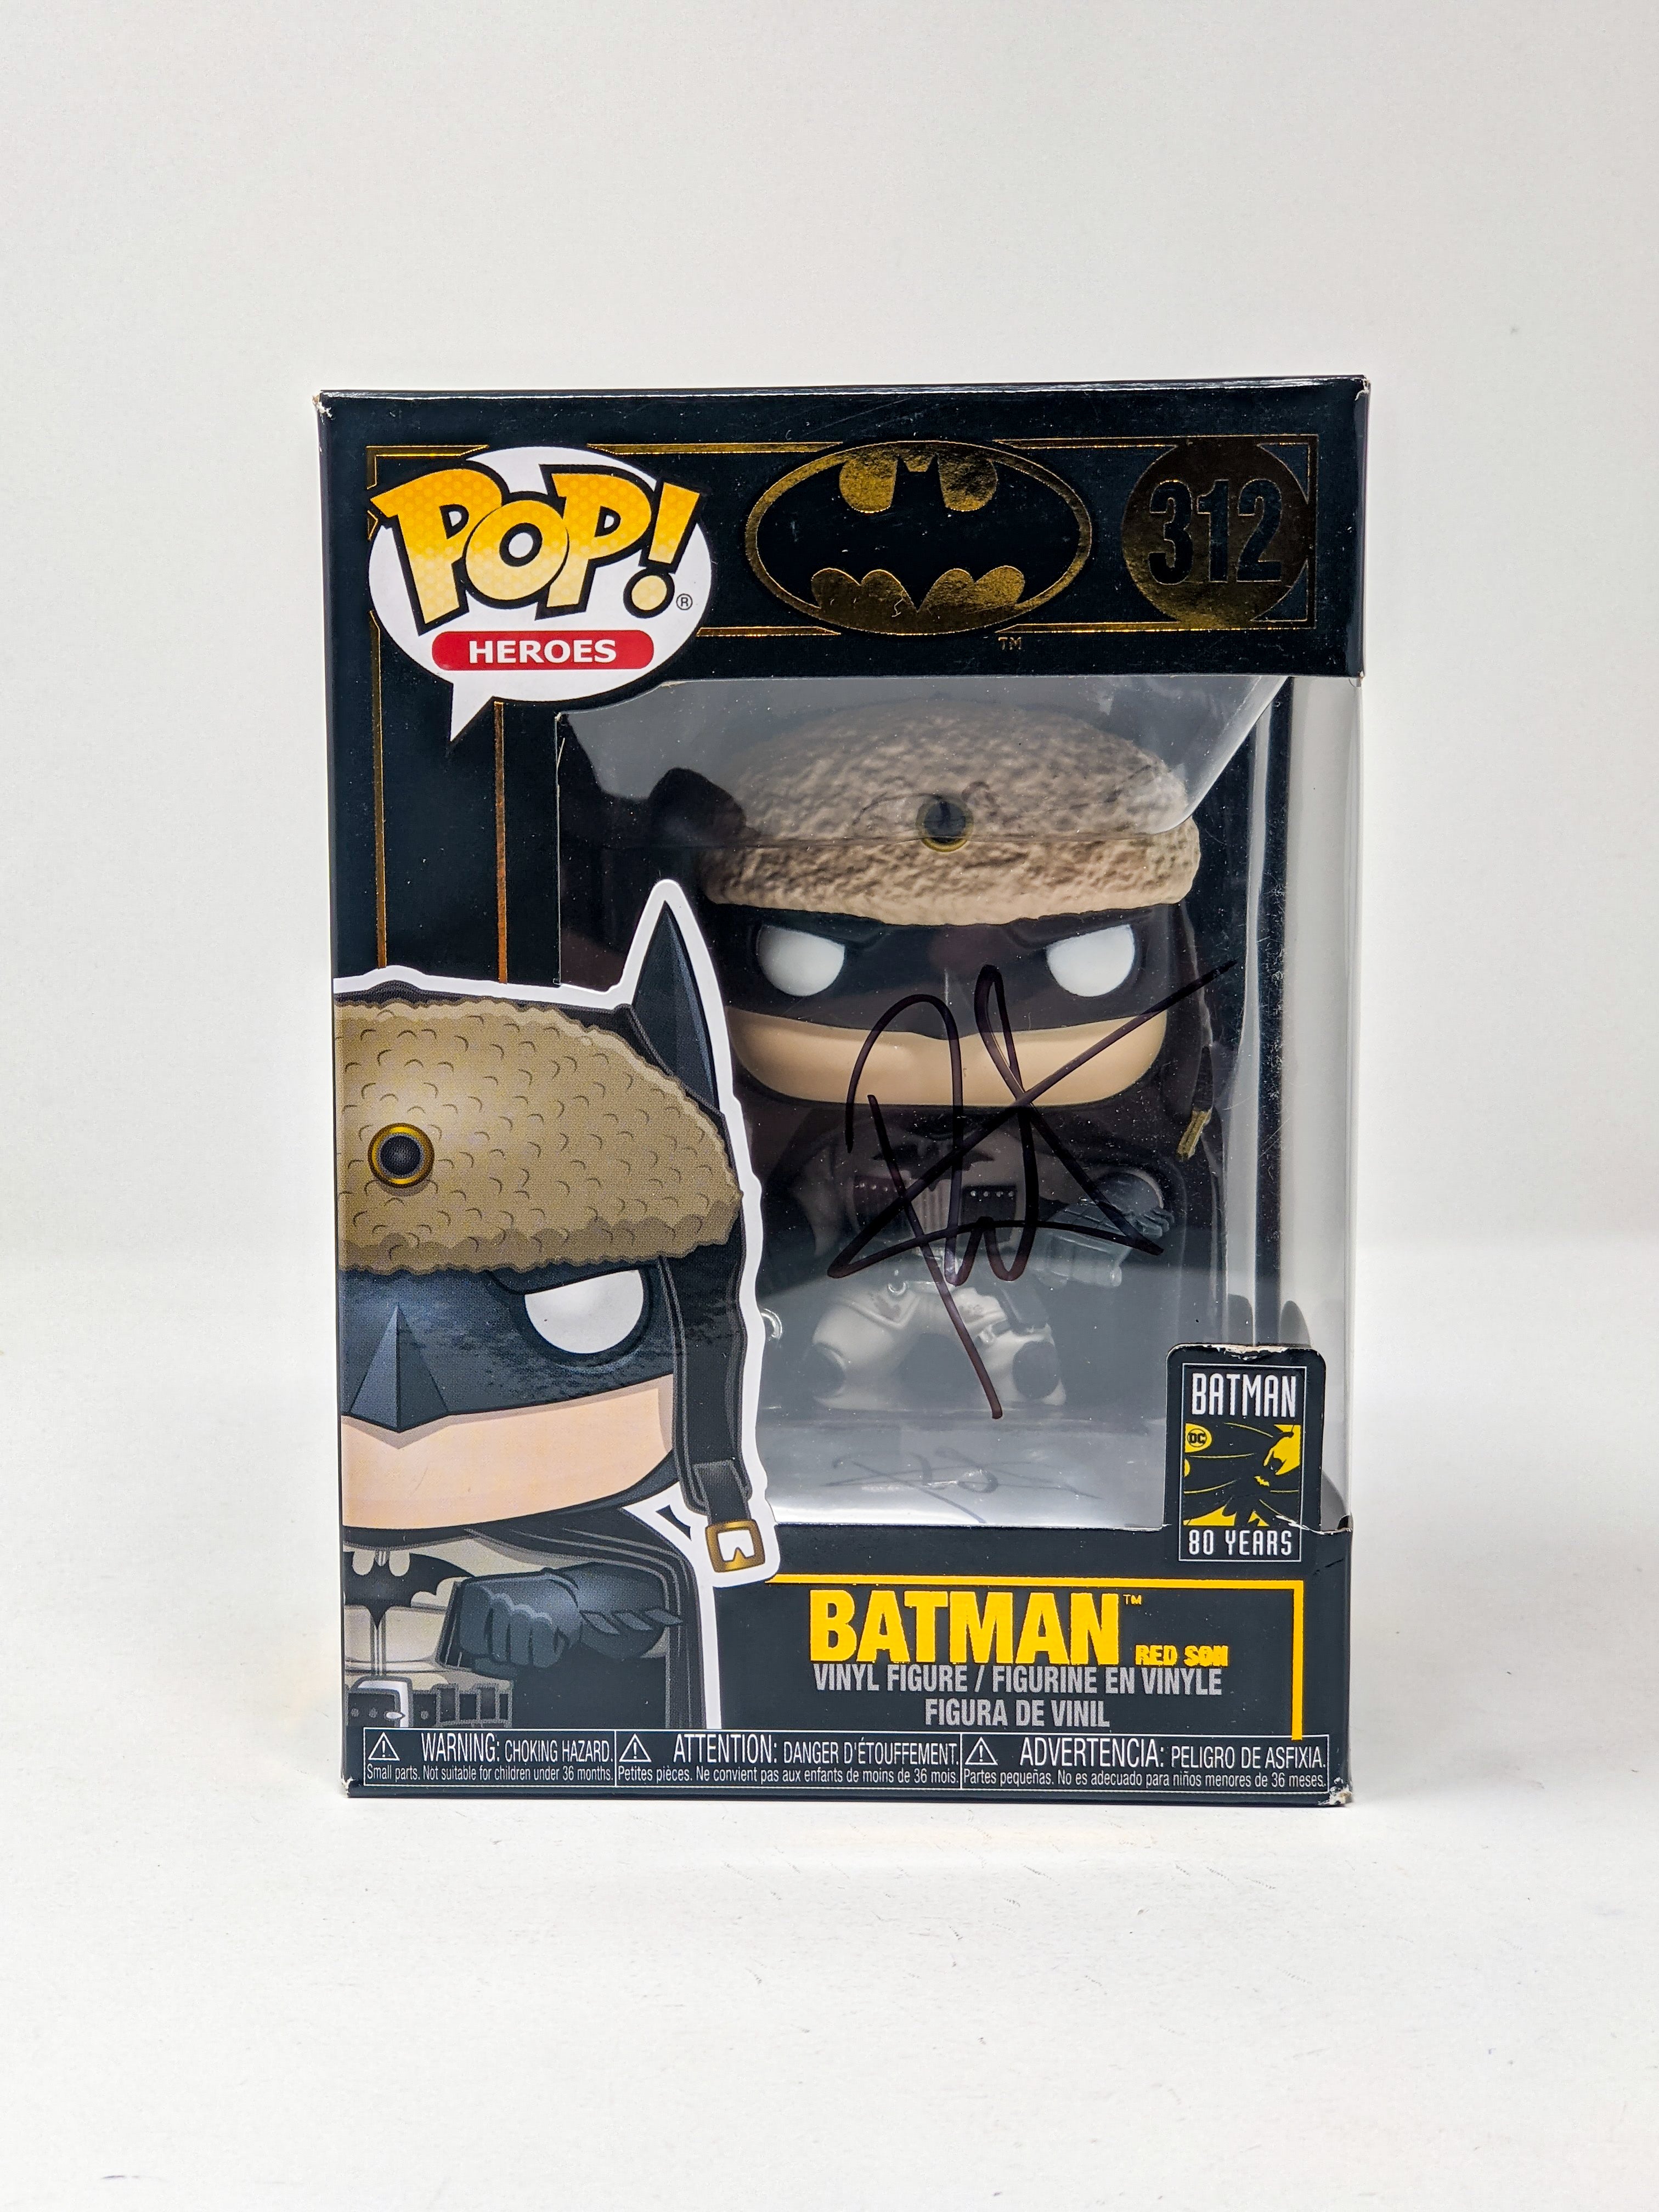 Roger Craig Smith DC Batman Red Son #312 Exclusive Signed Funko Pop JSA Certified Autograph GalaxyCon